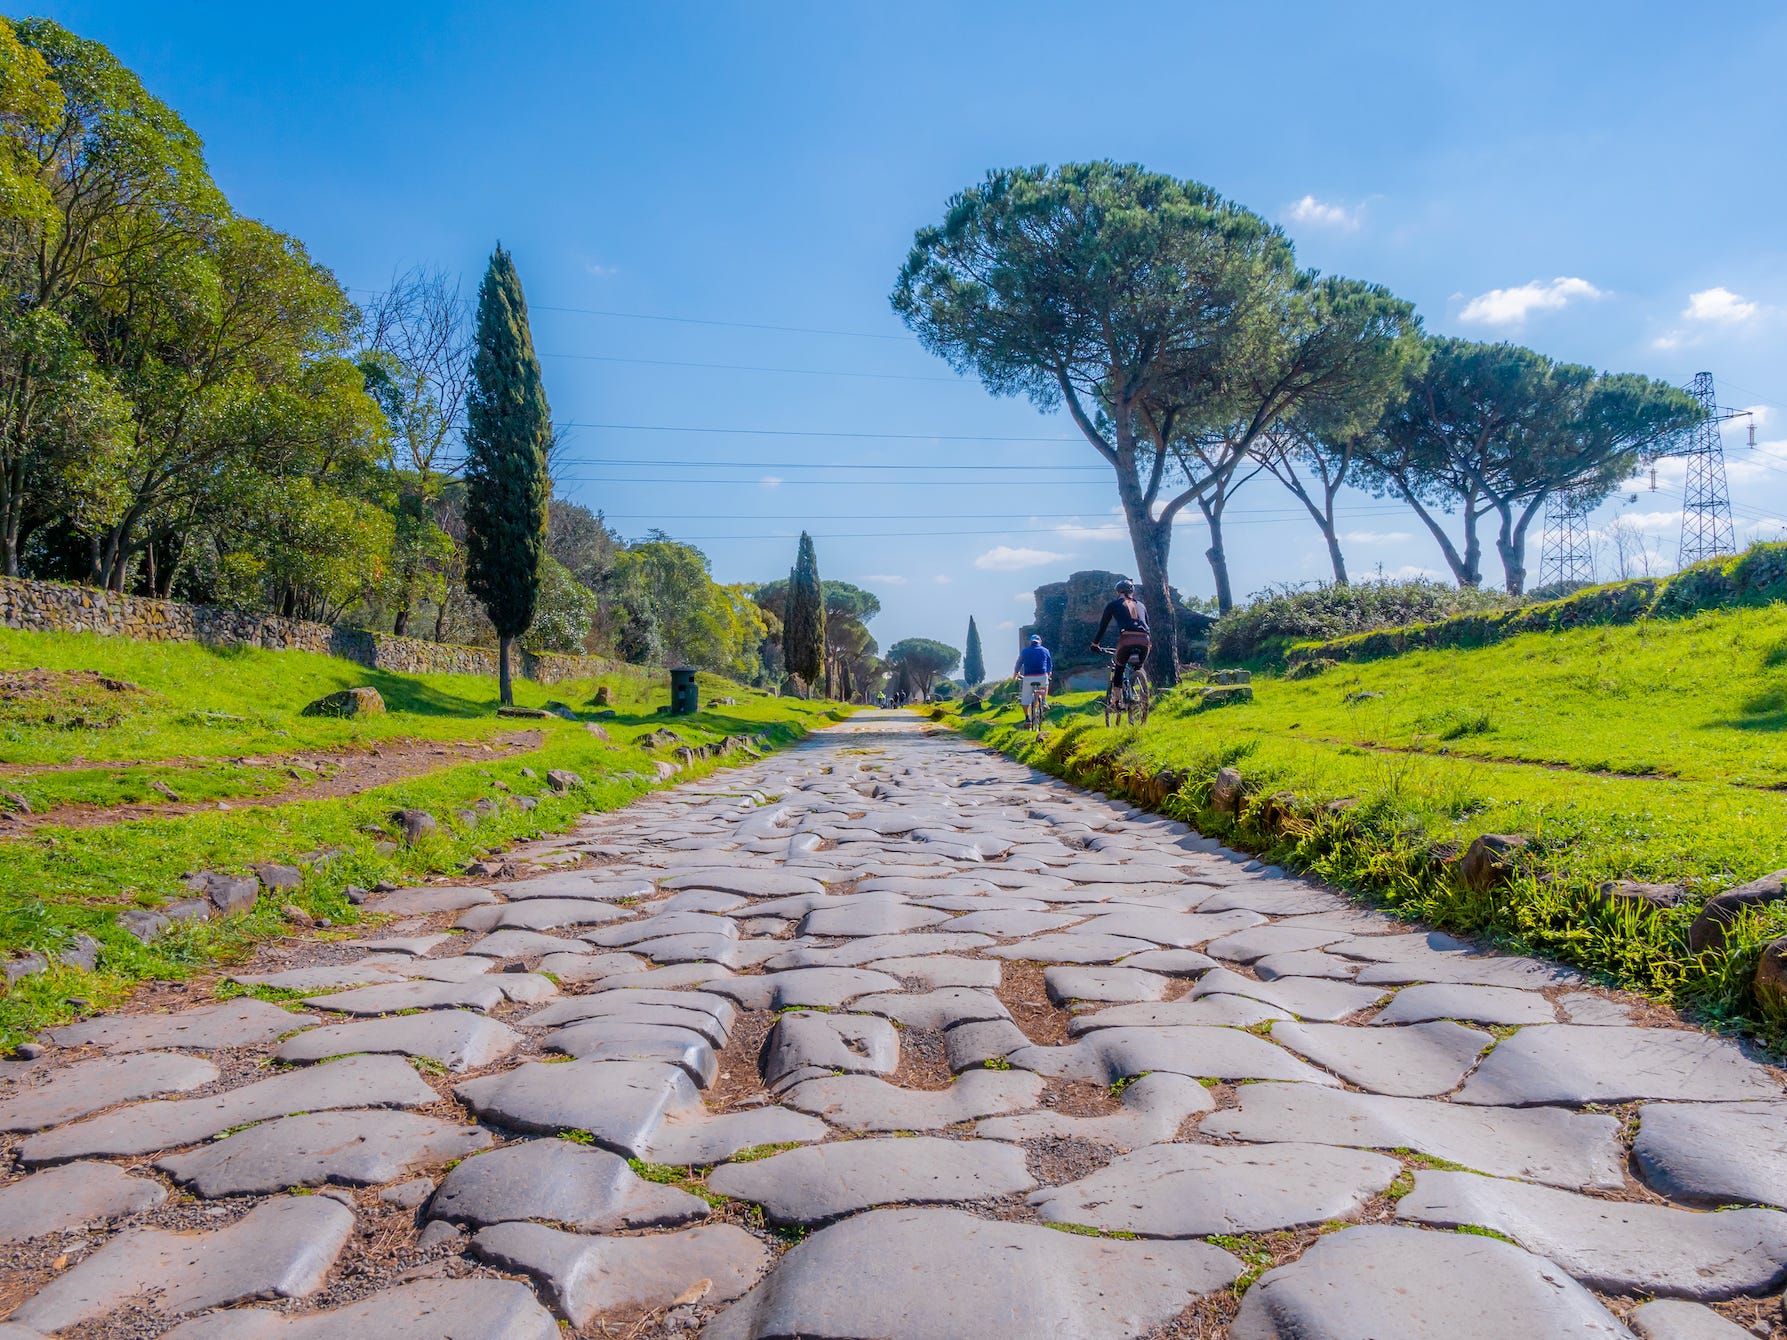 <p><span>The Appian Way is significant in Roman history as the oldest and most important road. But its appeal may be lost on the average tourist. </span></p><p><span>Nowadays, there are loads of bike and bus tours to the Catacombs along the road — making it crowded — and public transport there is difficult. </span></p><p><span>I suggest visiting the Park of the Aqueducts instead. It's an easy metro ride from Termini Station and offers a glimpse into what the </span><a href="https://www.businessinsider.com/luxury-hotel-and-villas-italy-comparison-photos-2023-9"><span>Roman countryside</span></a><span> would've been like. </span></p>